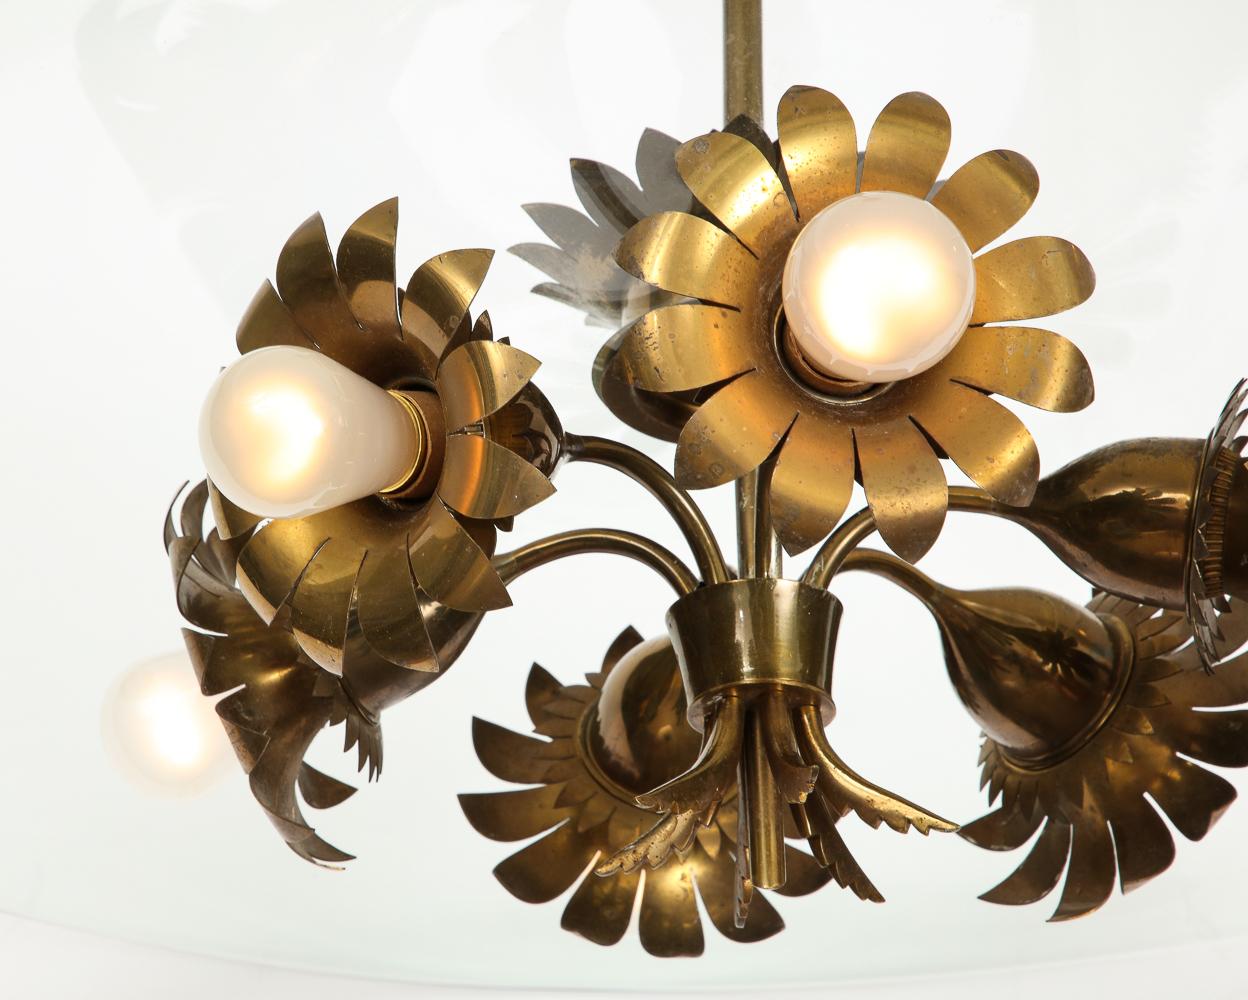 Rare ceiling fixture by Pietro Chiesa for Fontana Arte. Brass, glass. Lacquered brass with six flower-shaped socket holders and intricate floral motif decorations. Beveled clear glass disc, and original brass canopy.